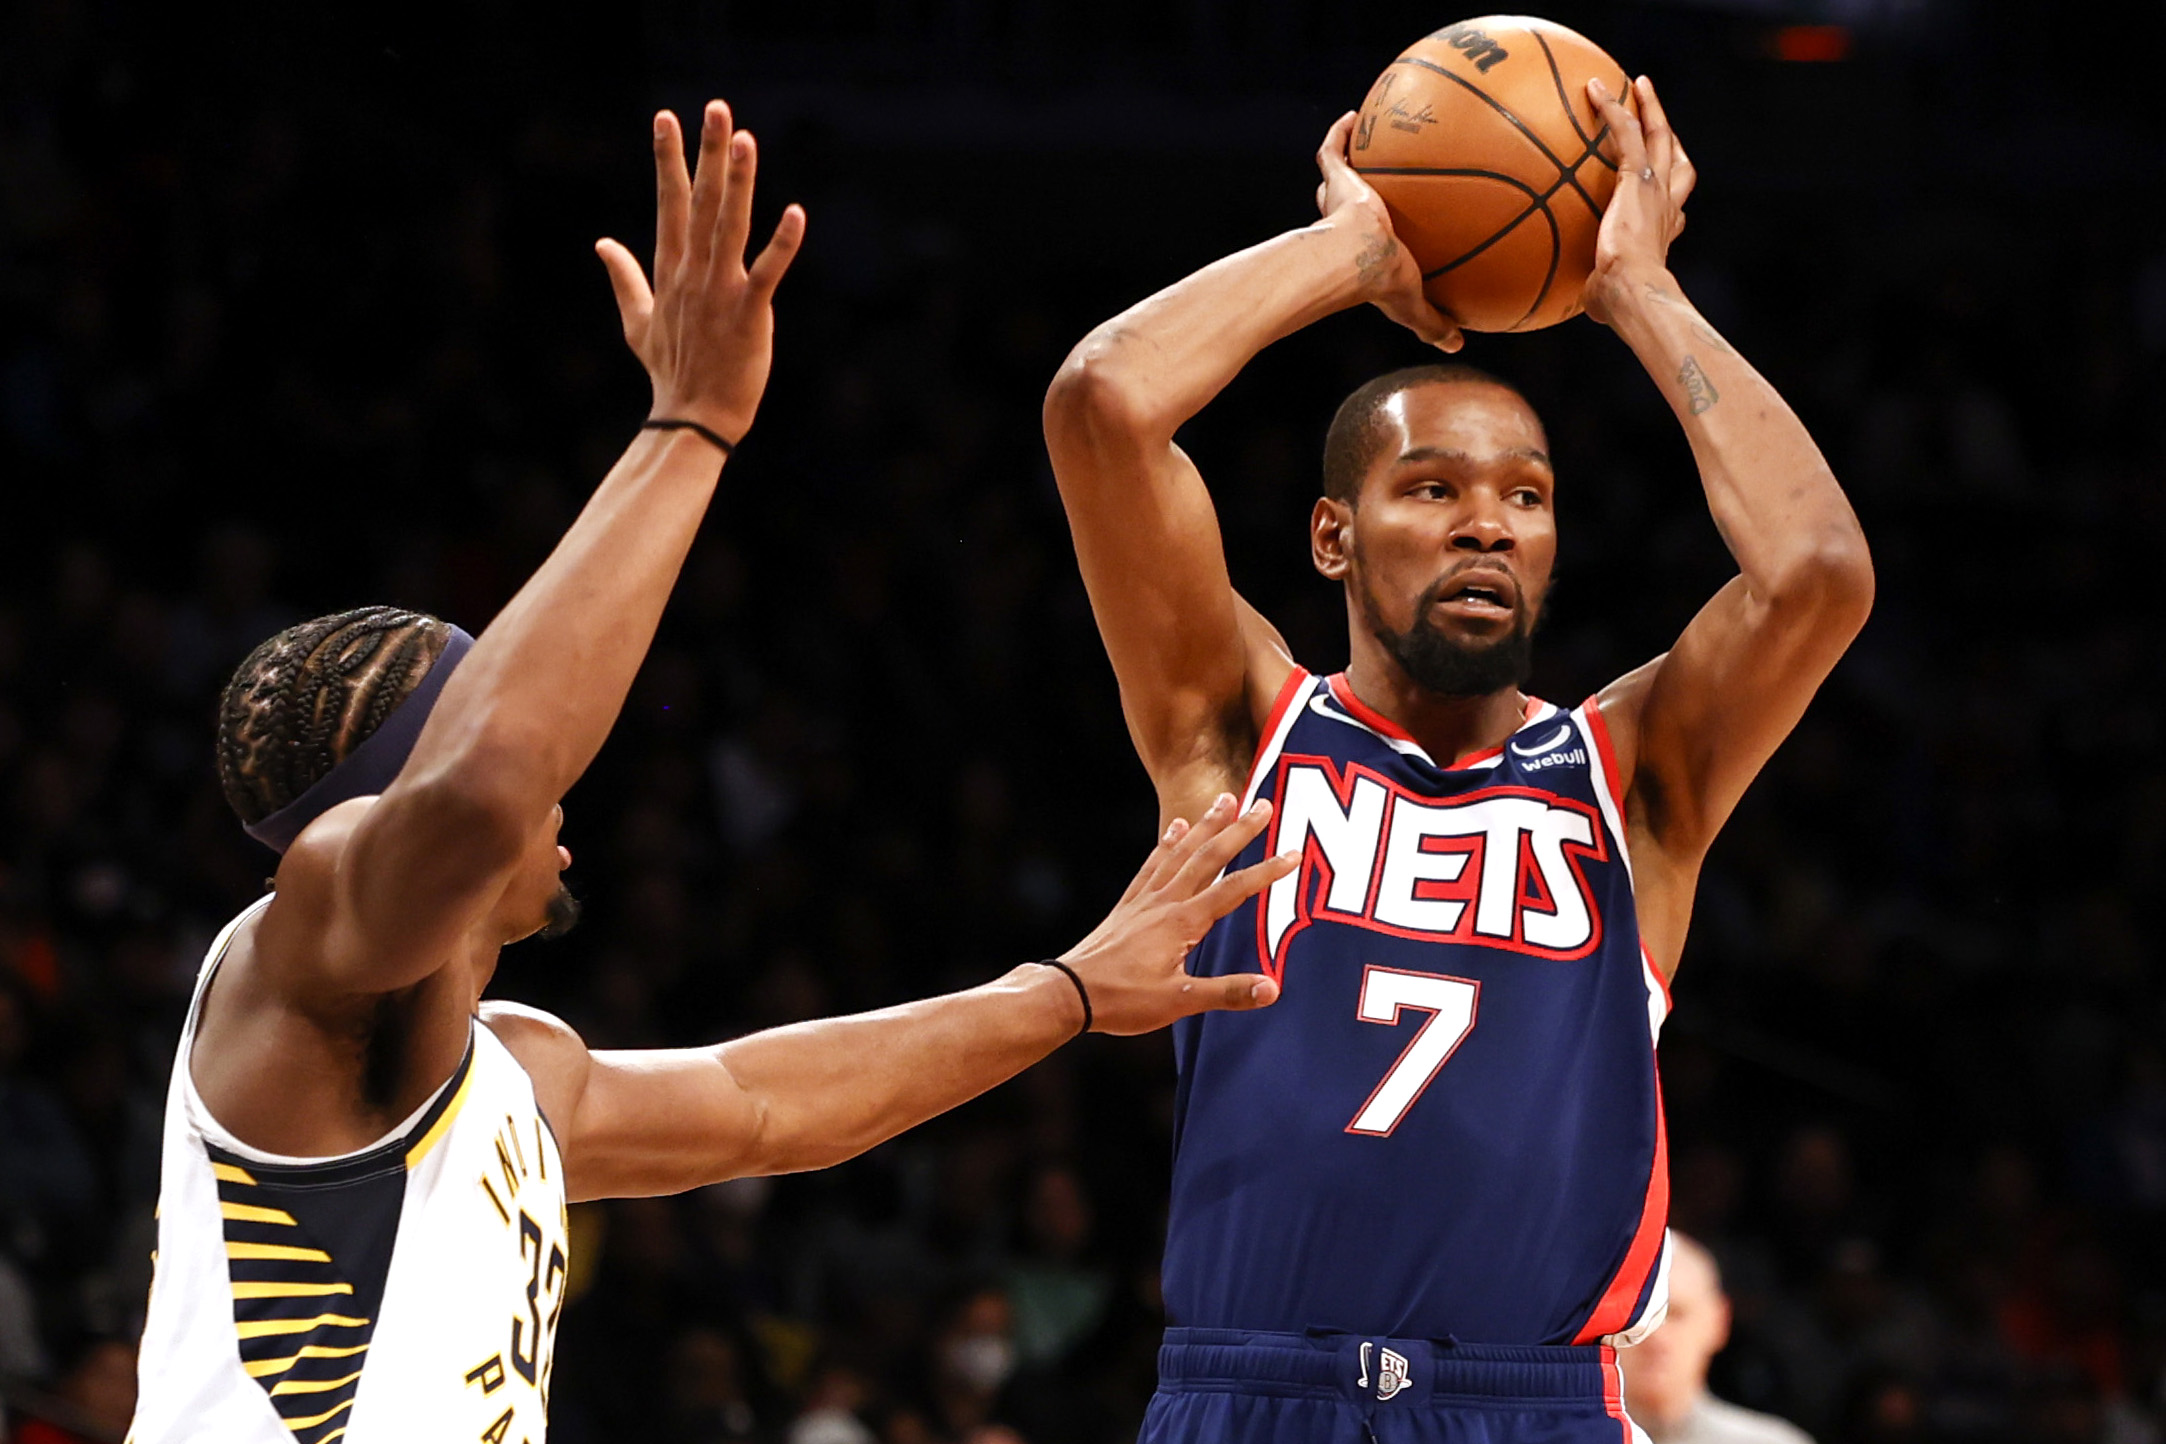 Kevin Durant playing for the Nets on April 10, 2022.